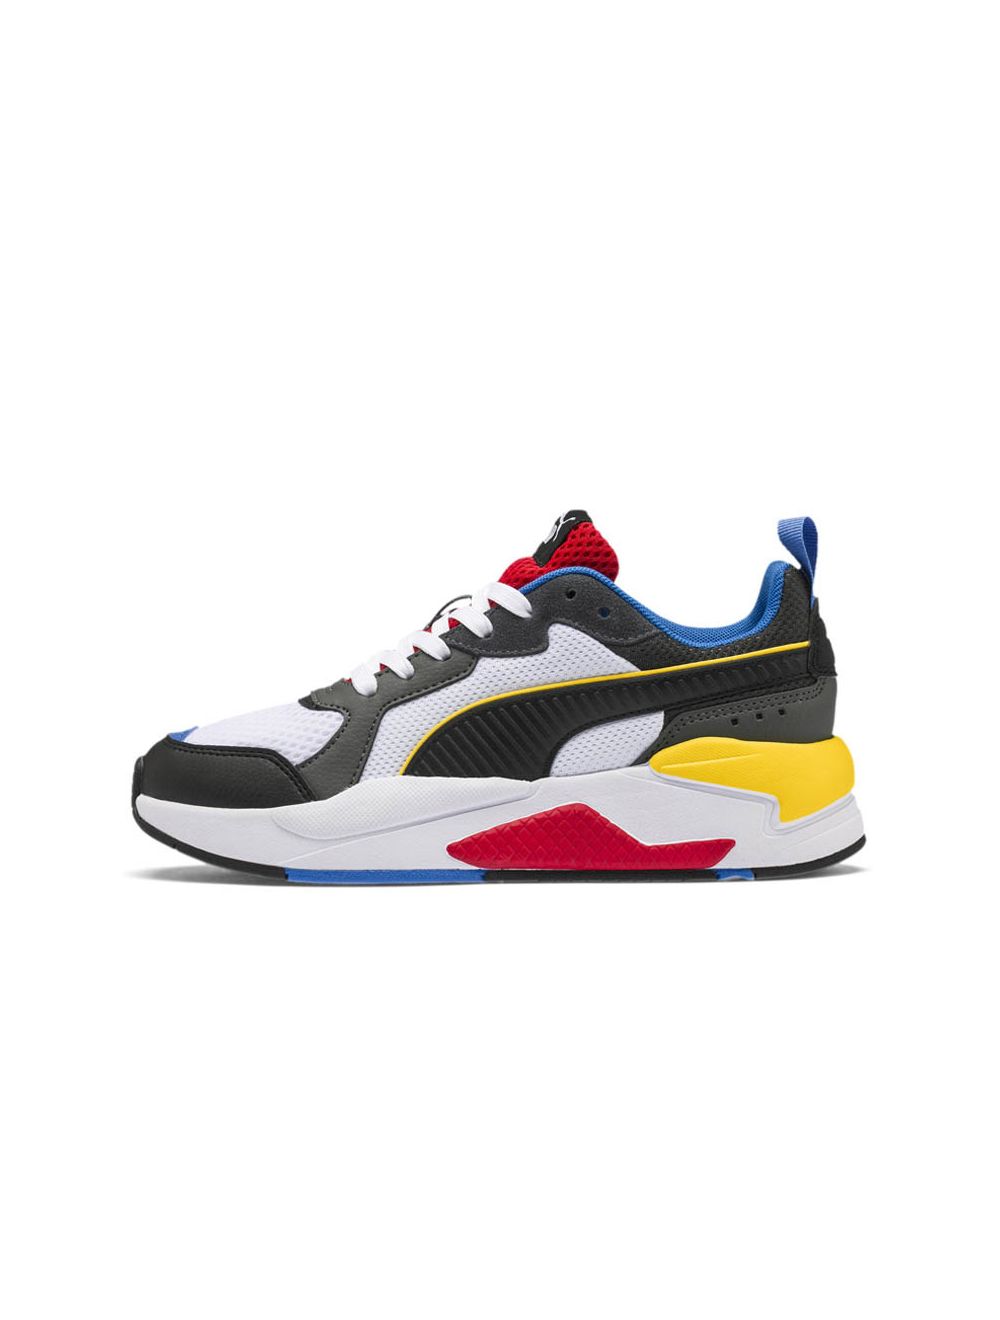 Puma X-Ray Youth Sneaker White Blk Dk Shadow Red Blue